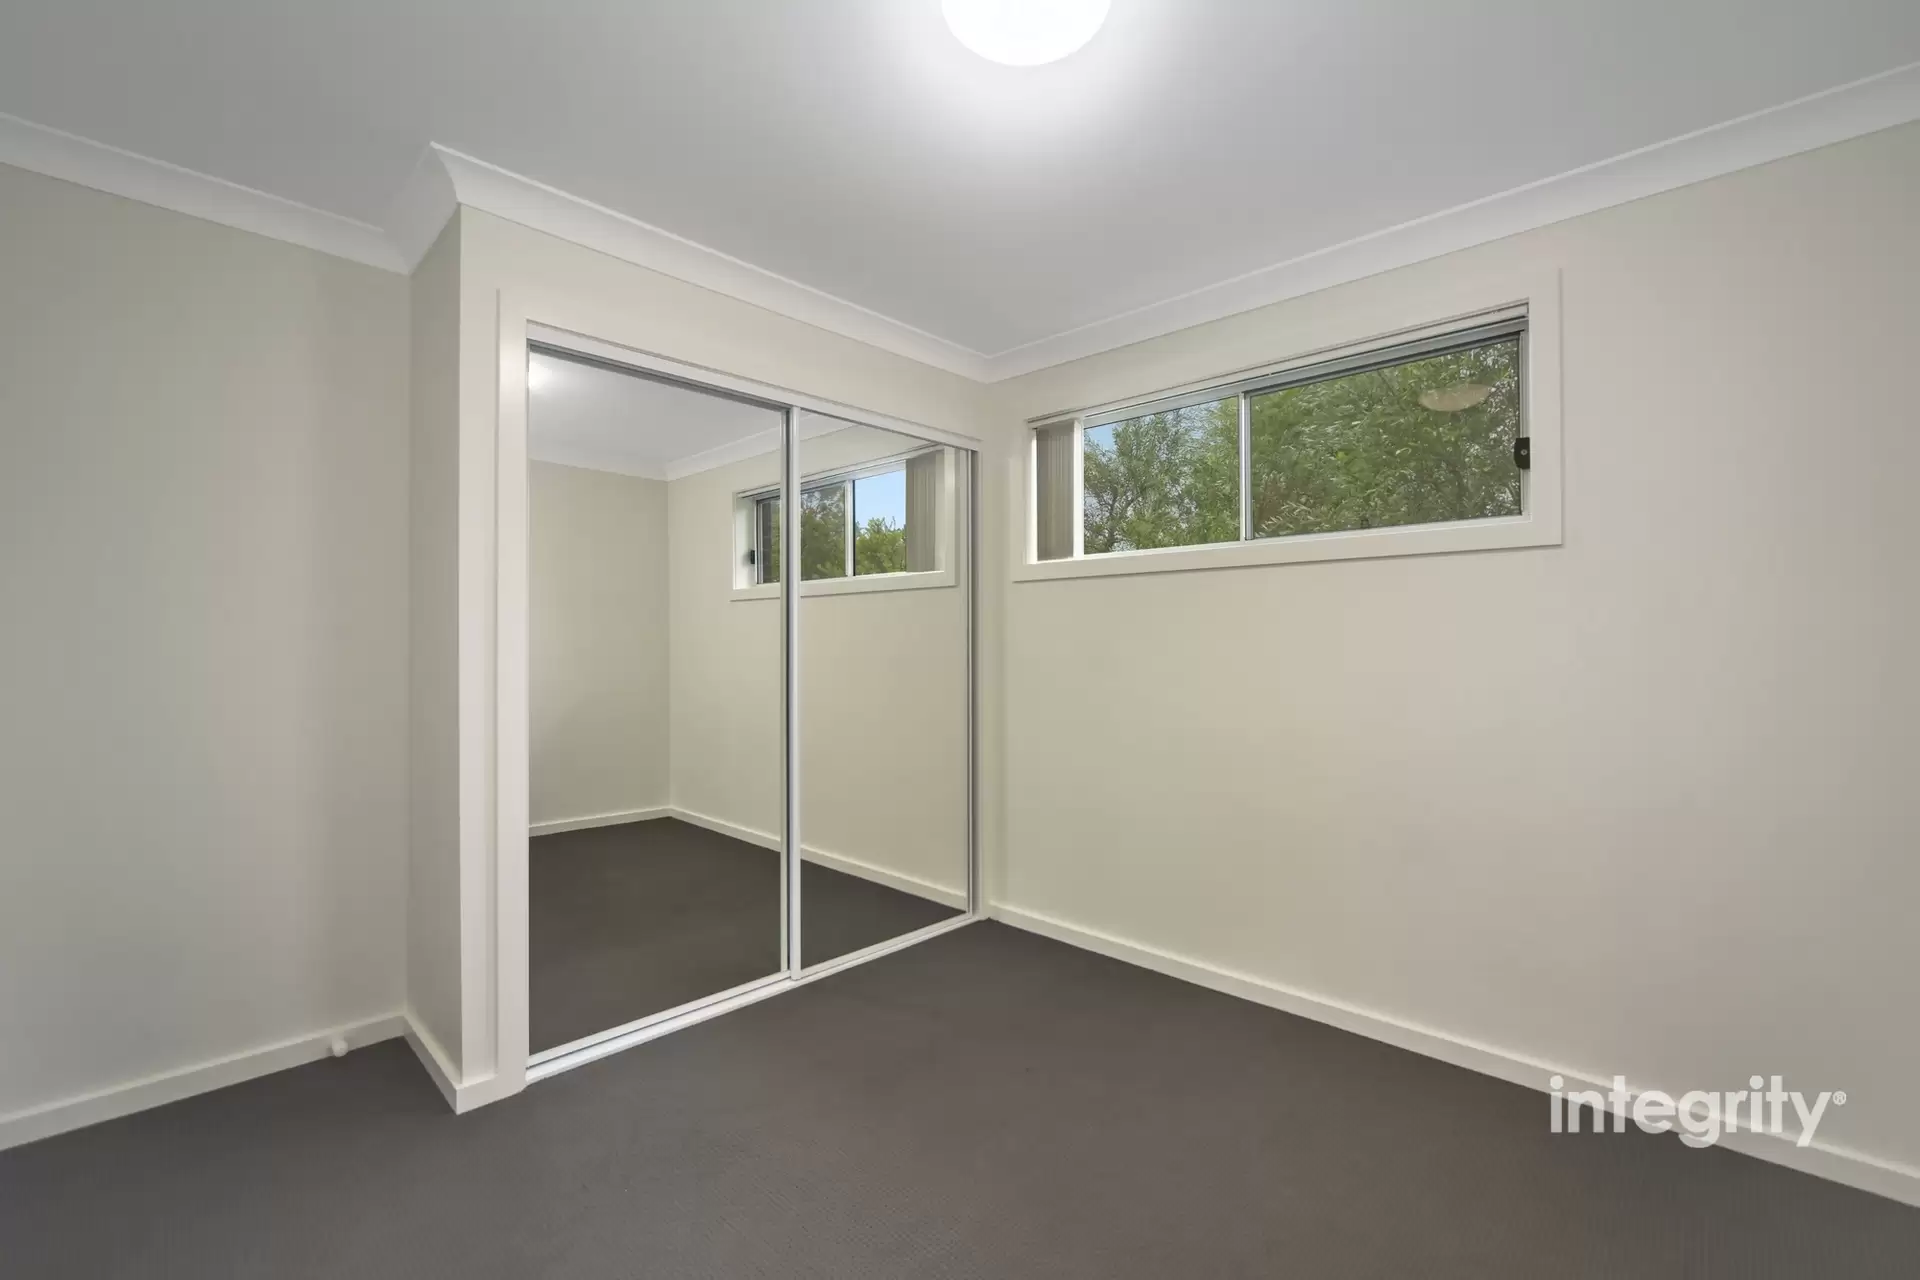 27B Birriley Street, Bomaderry Sold by Integrity Real Estate - image 4